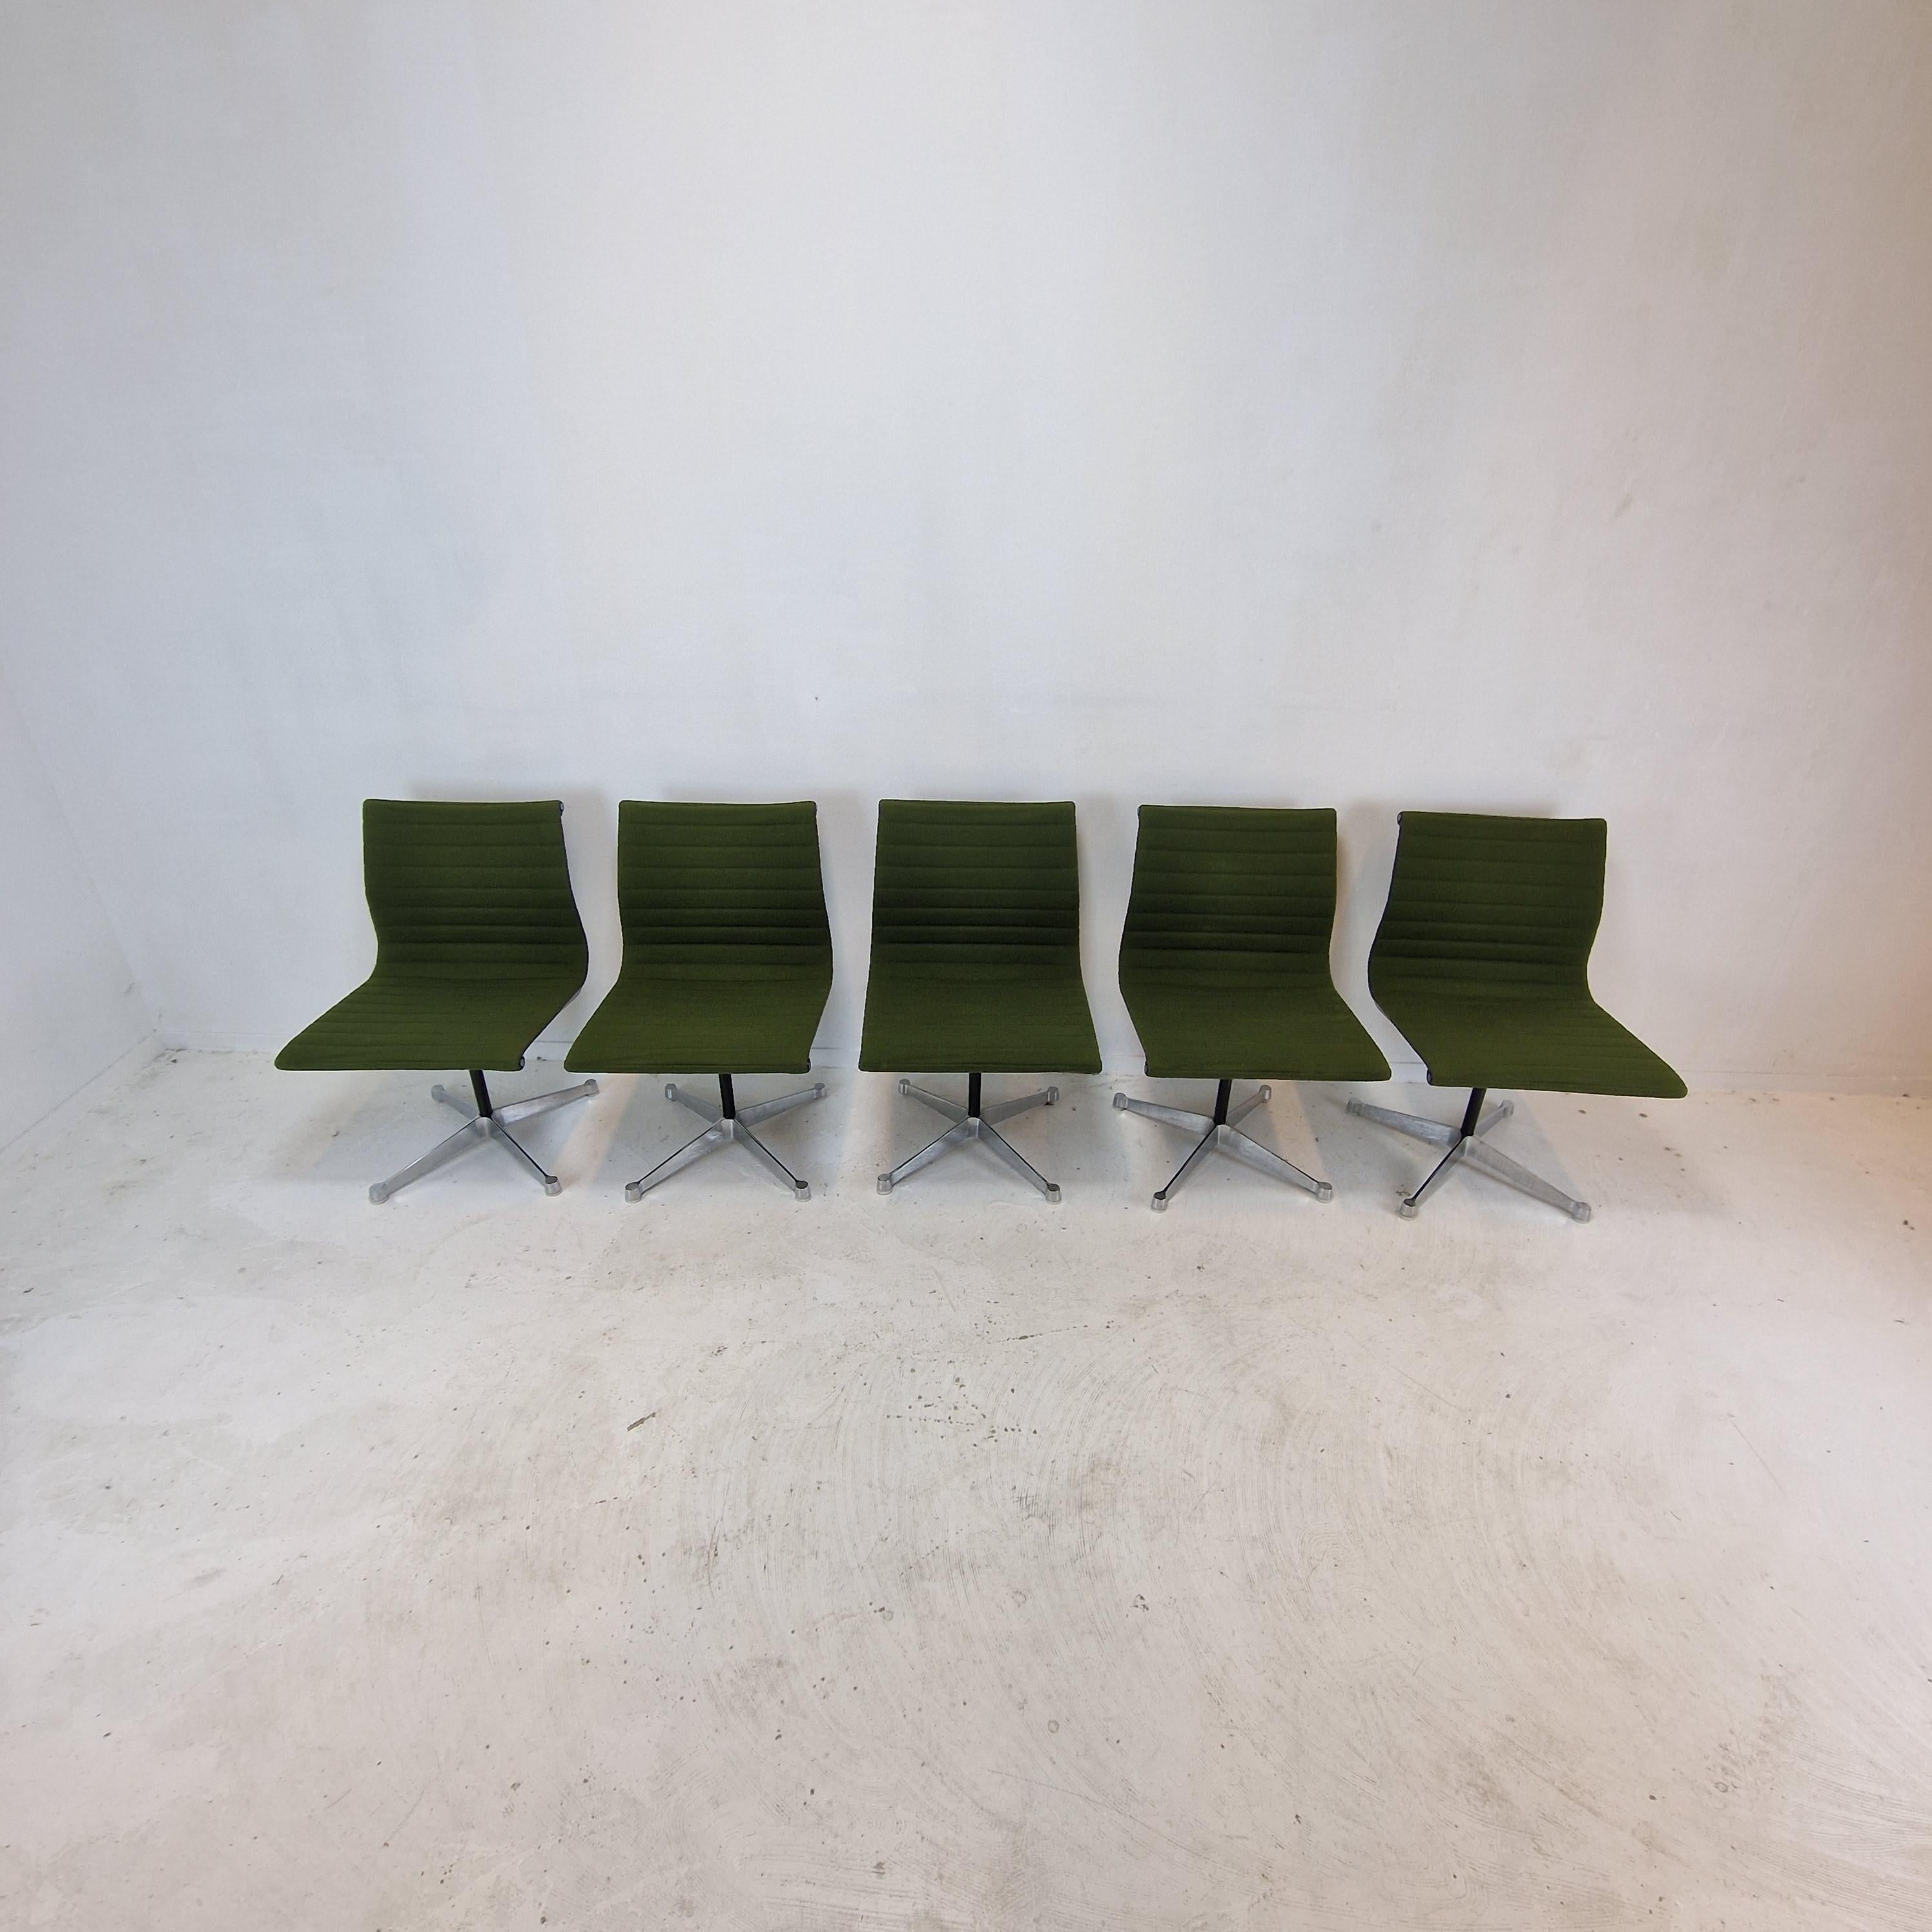 Late 20th Century Set of 5 Model EA 105 Chairs by Eames for Herman Miller, 1970's For Sale